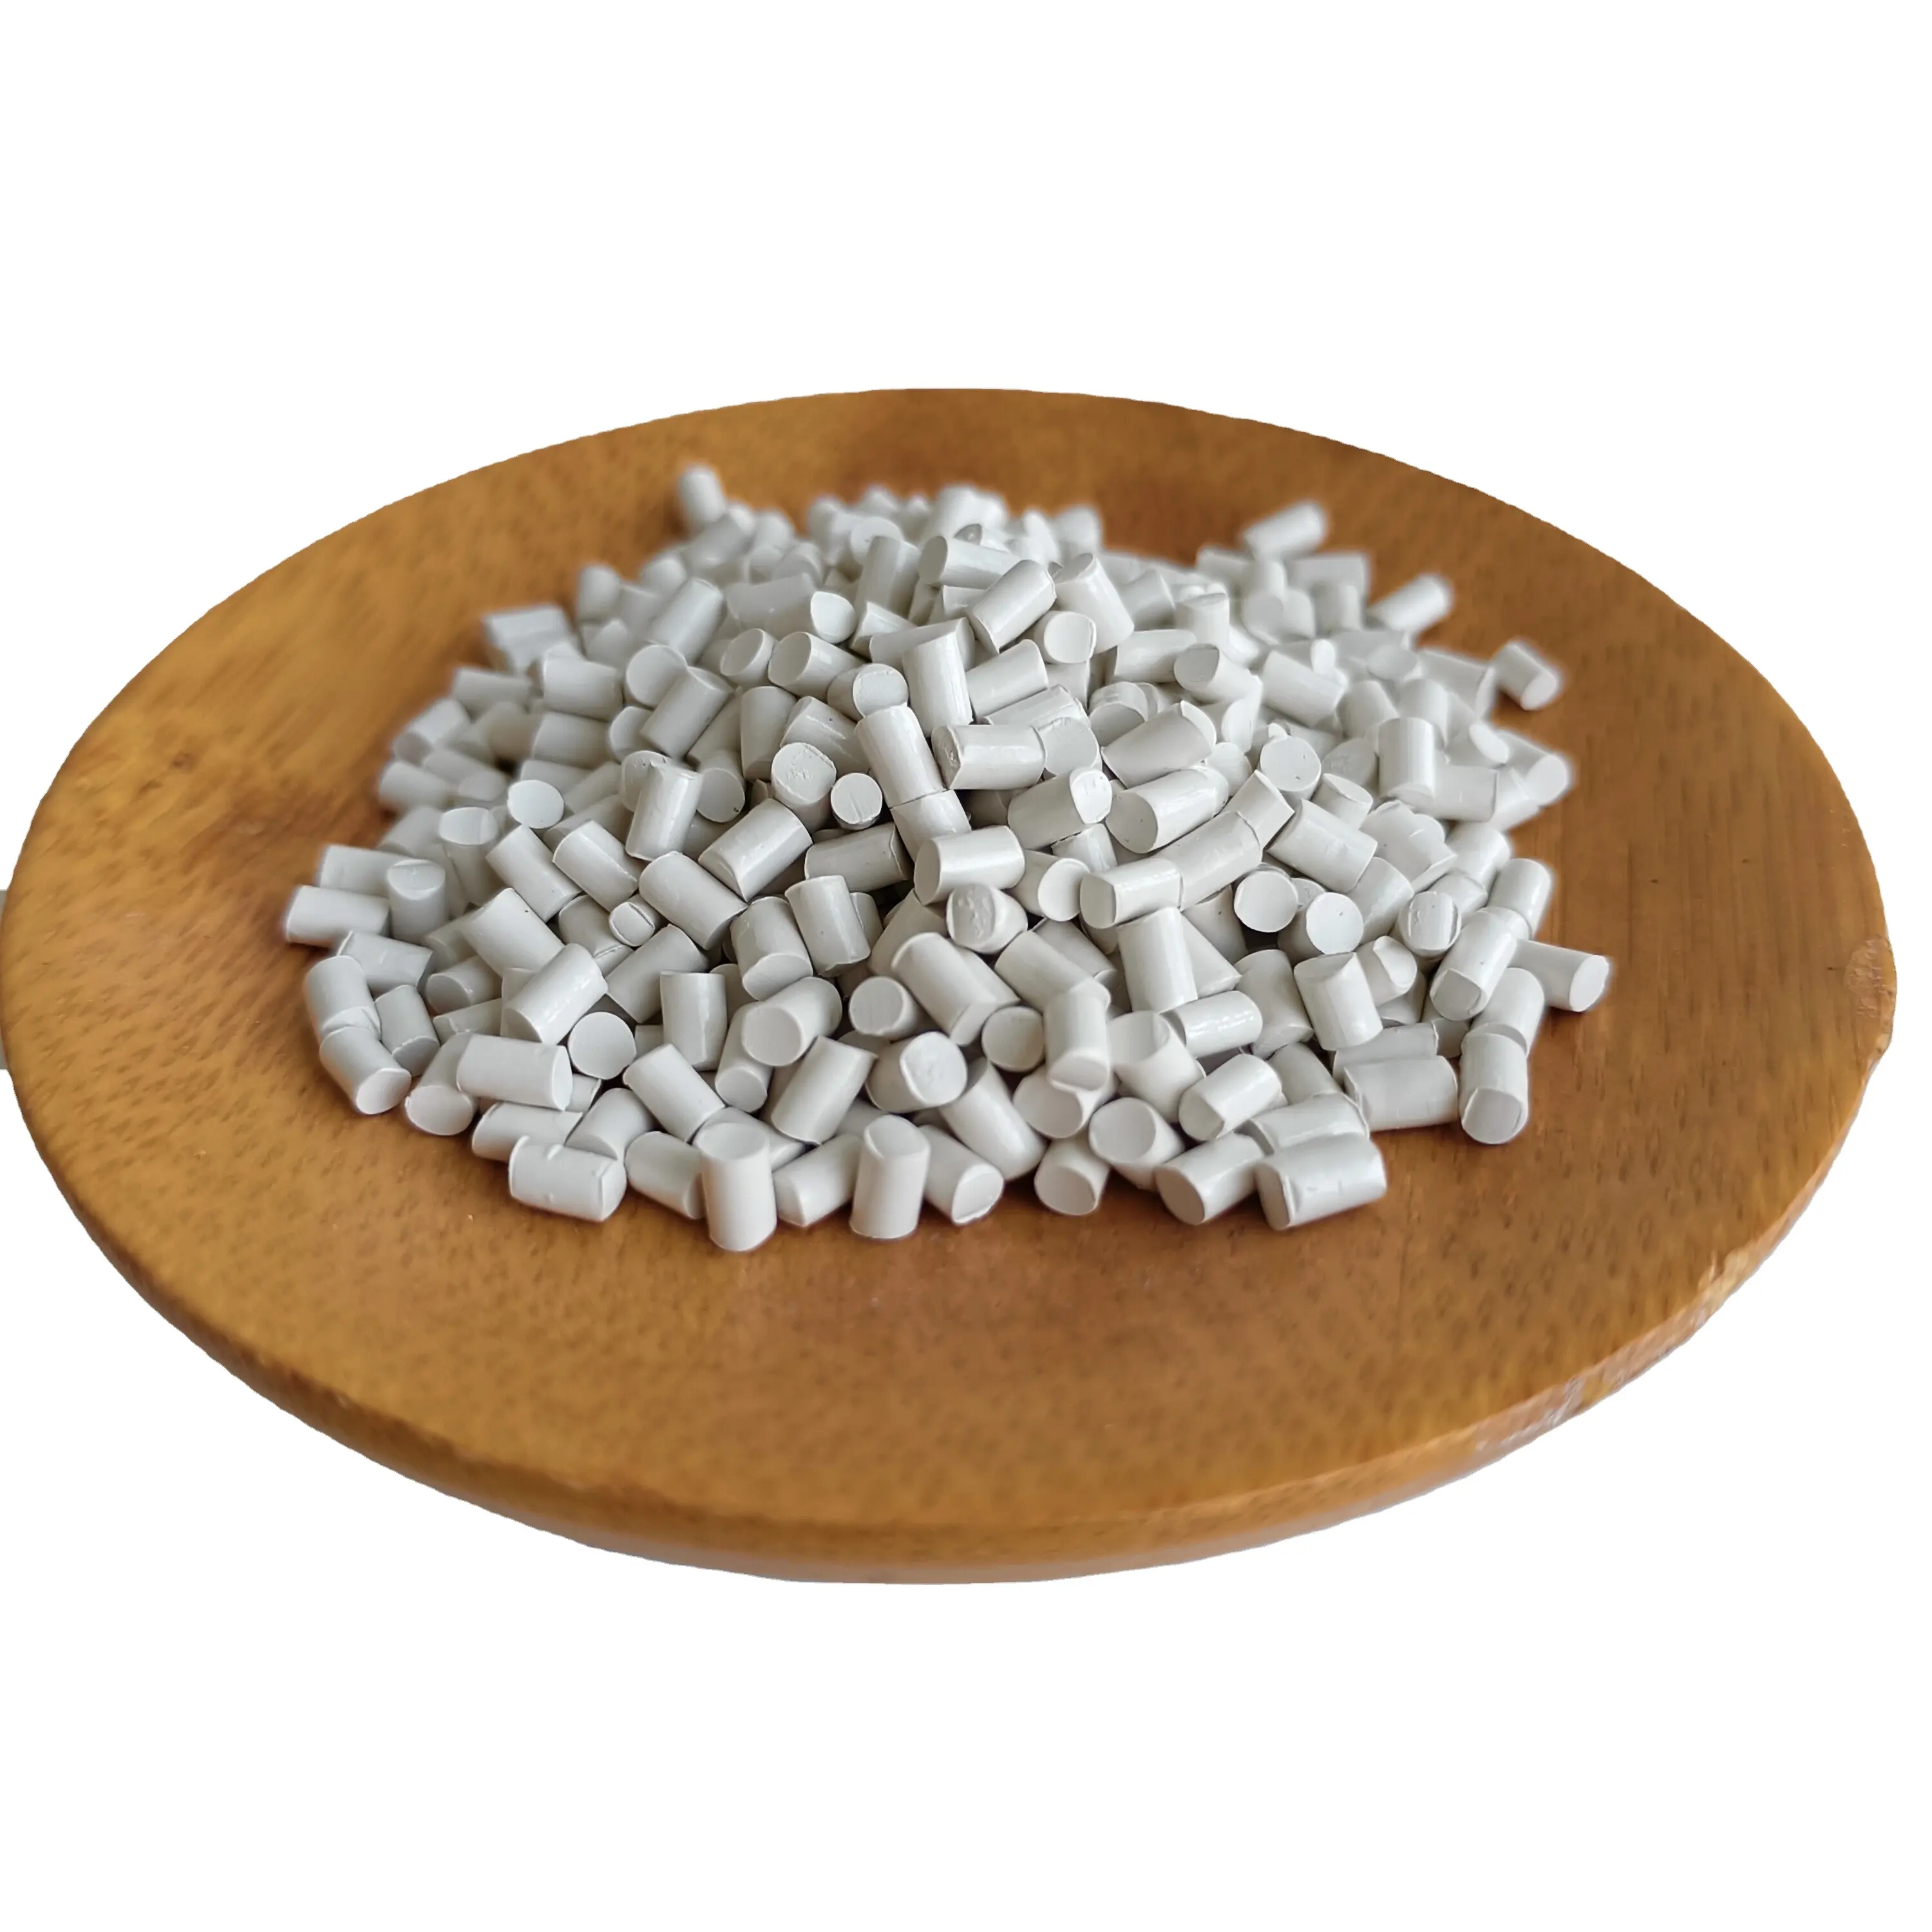 ABS Engineering Plastic Modified ABS Granules Excellent Toughness and High Impact for auto parts with flame retardant